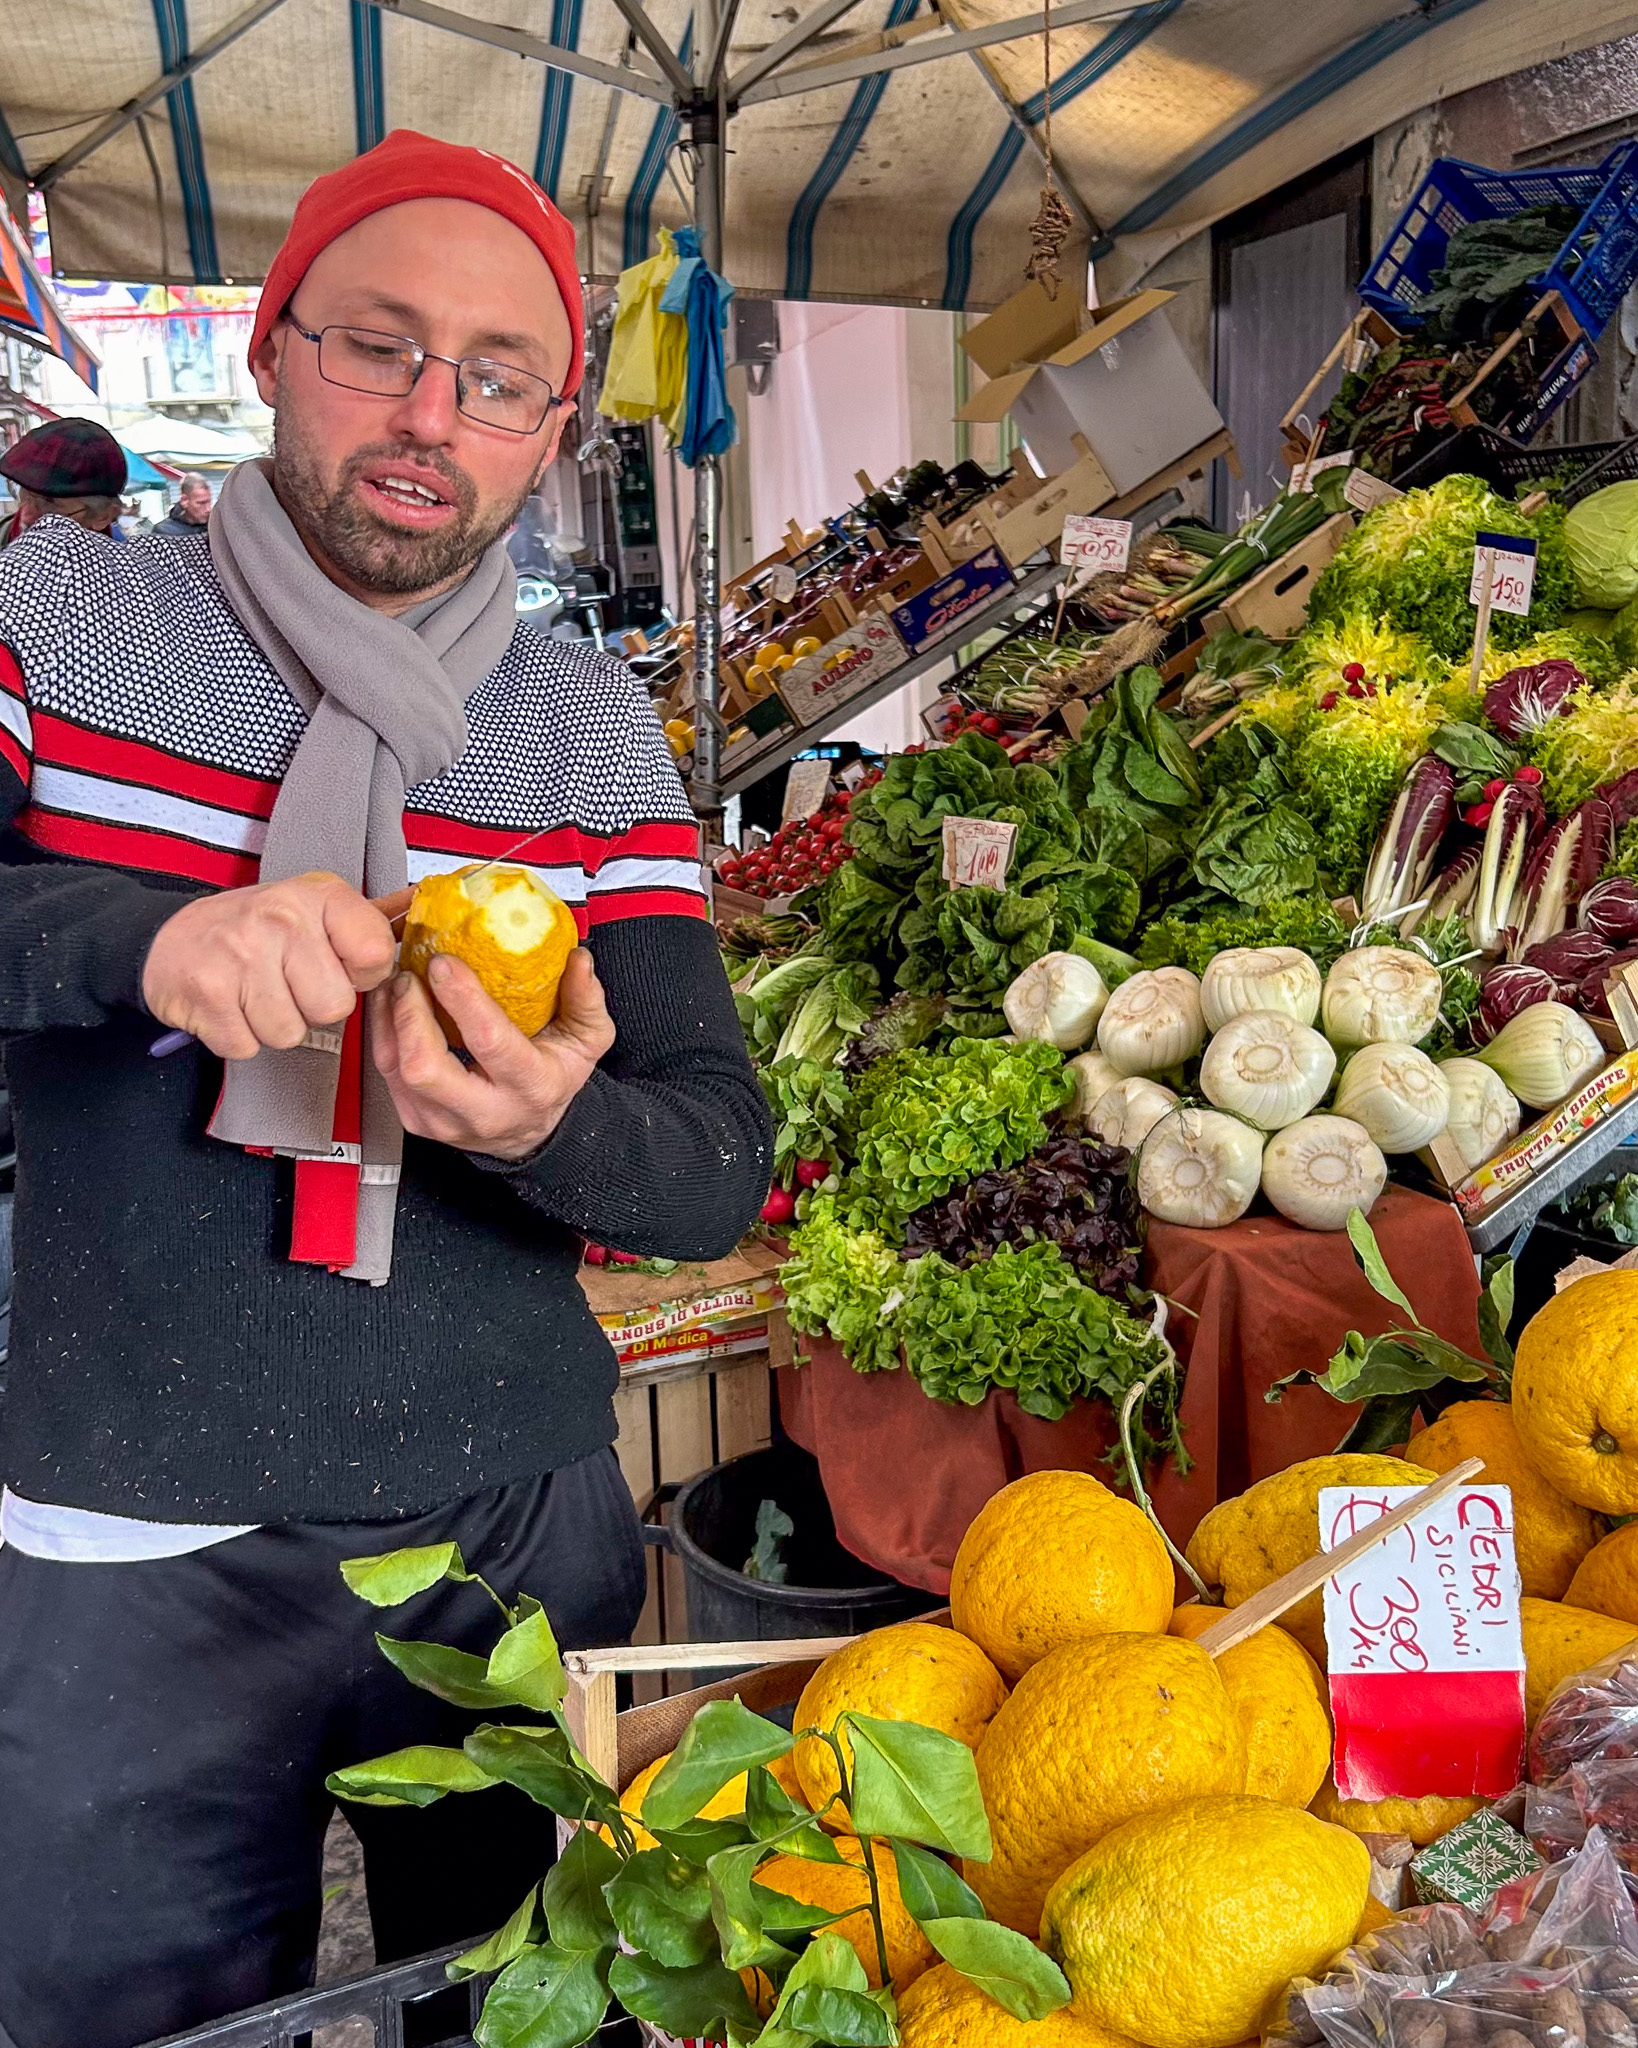 Market vendor peeling a citron at one of the markets in Catania